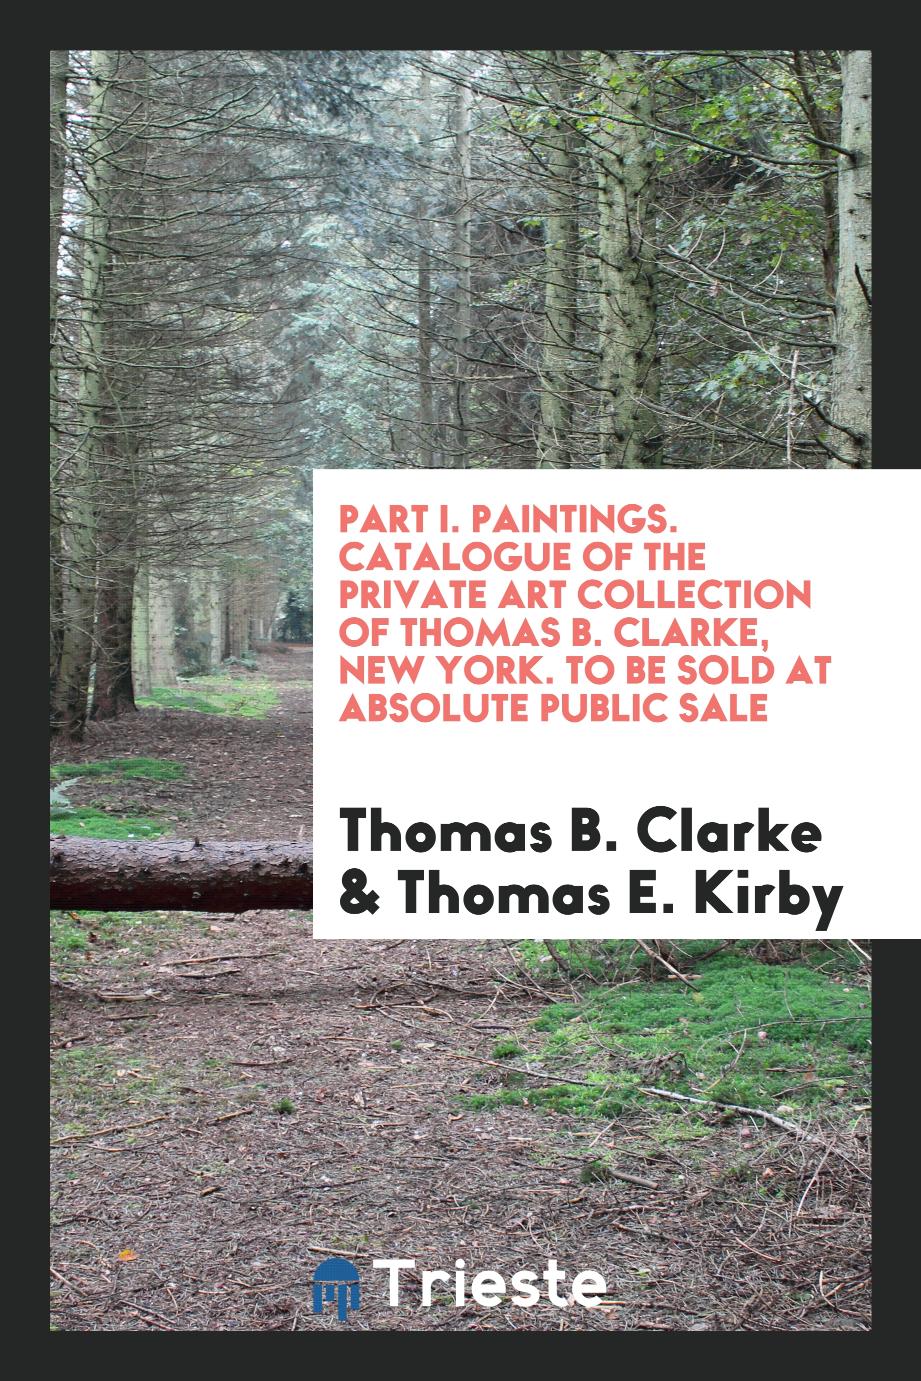 Part I. Paintings. Catalogue of the Private Art Collection of Thomas B. Clarke, New York. To Be Sold at Absolute Public Sale